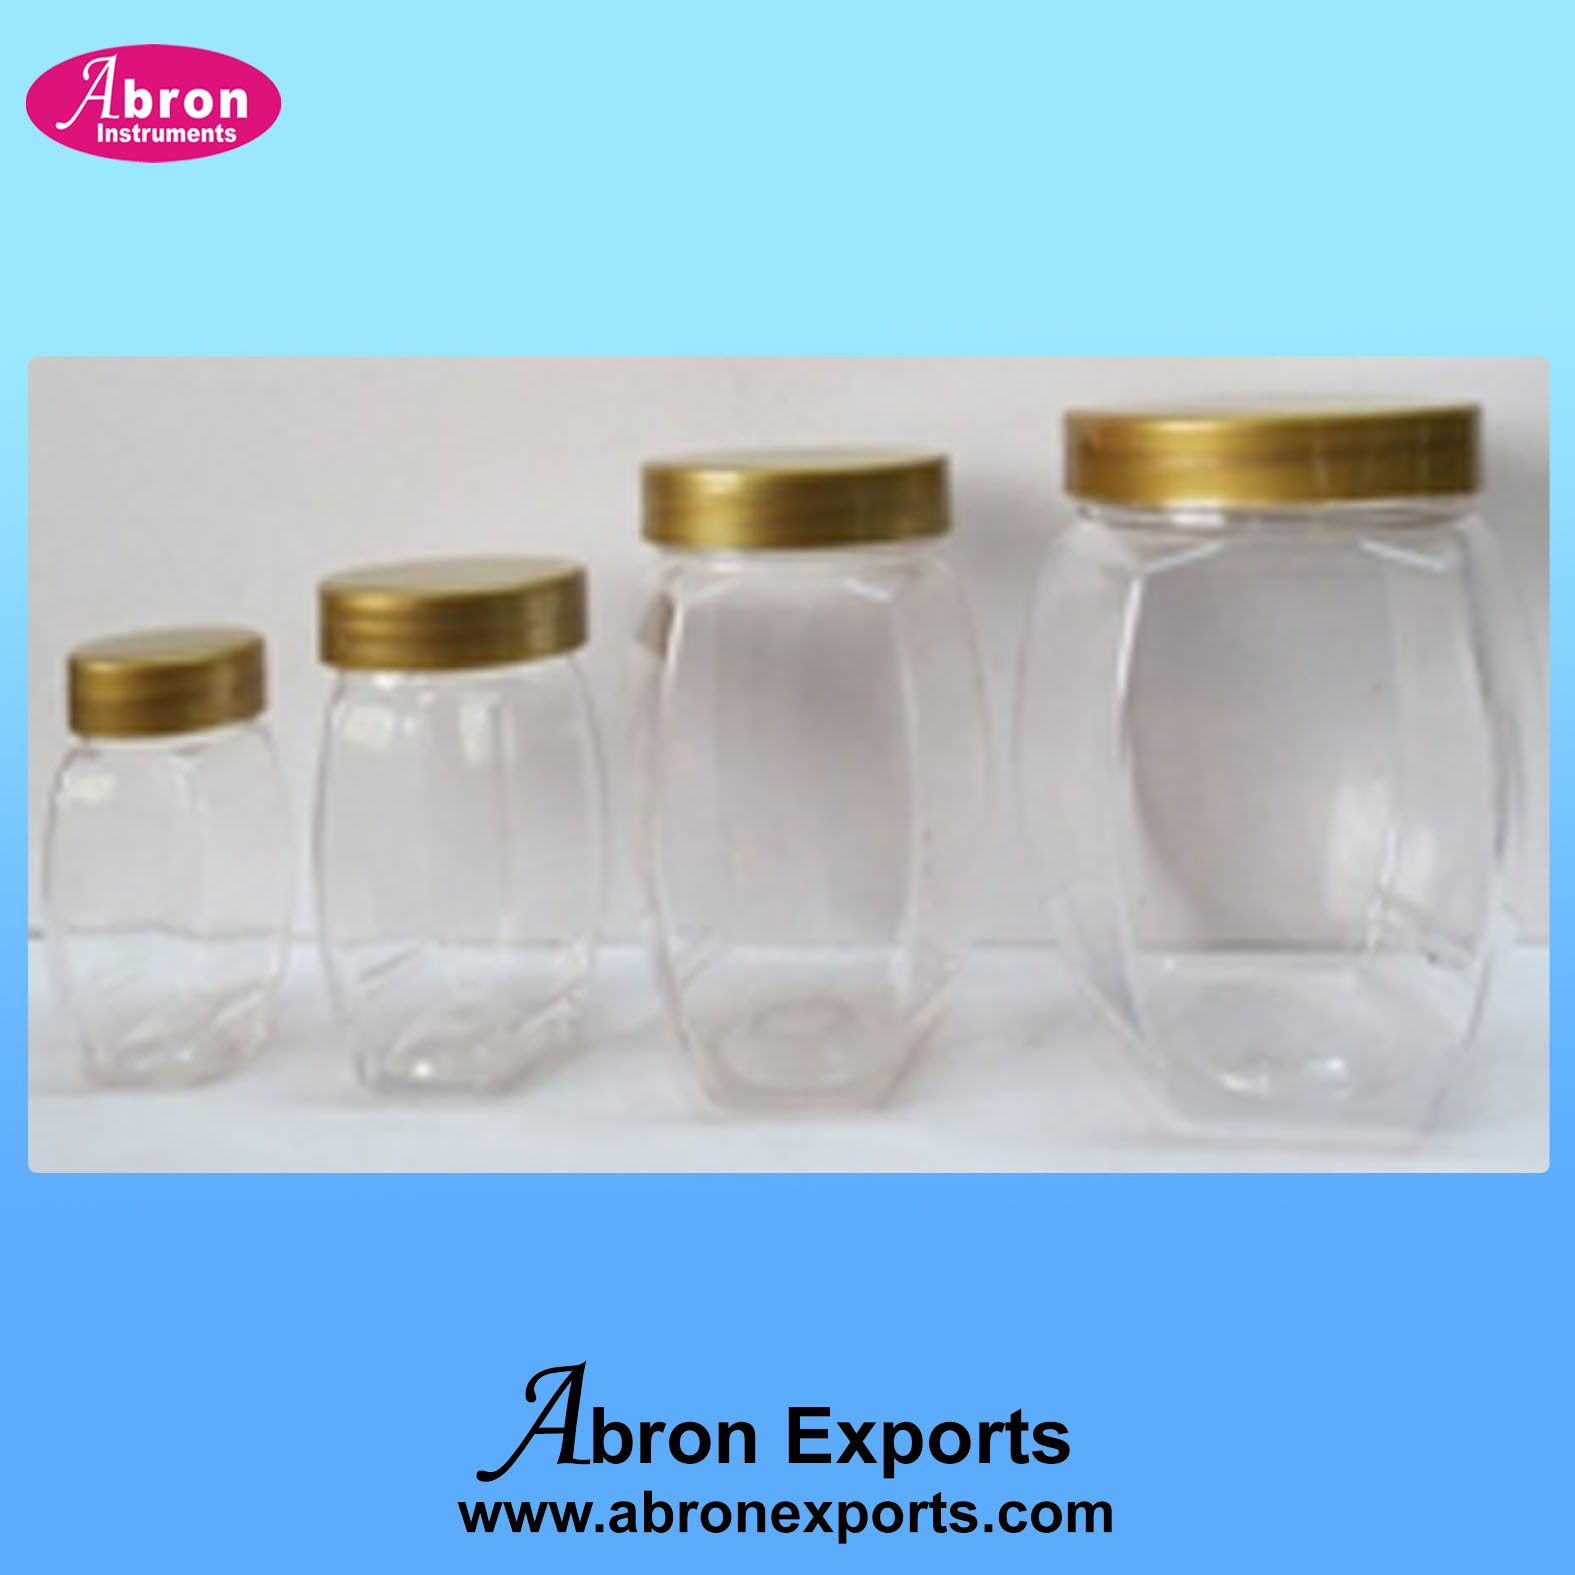 1kg Honey Packing Wide Mouth jar Abron AT-9516-200-500